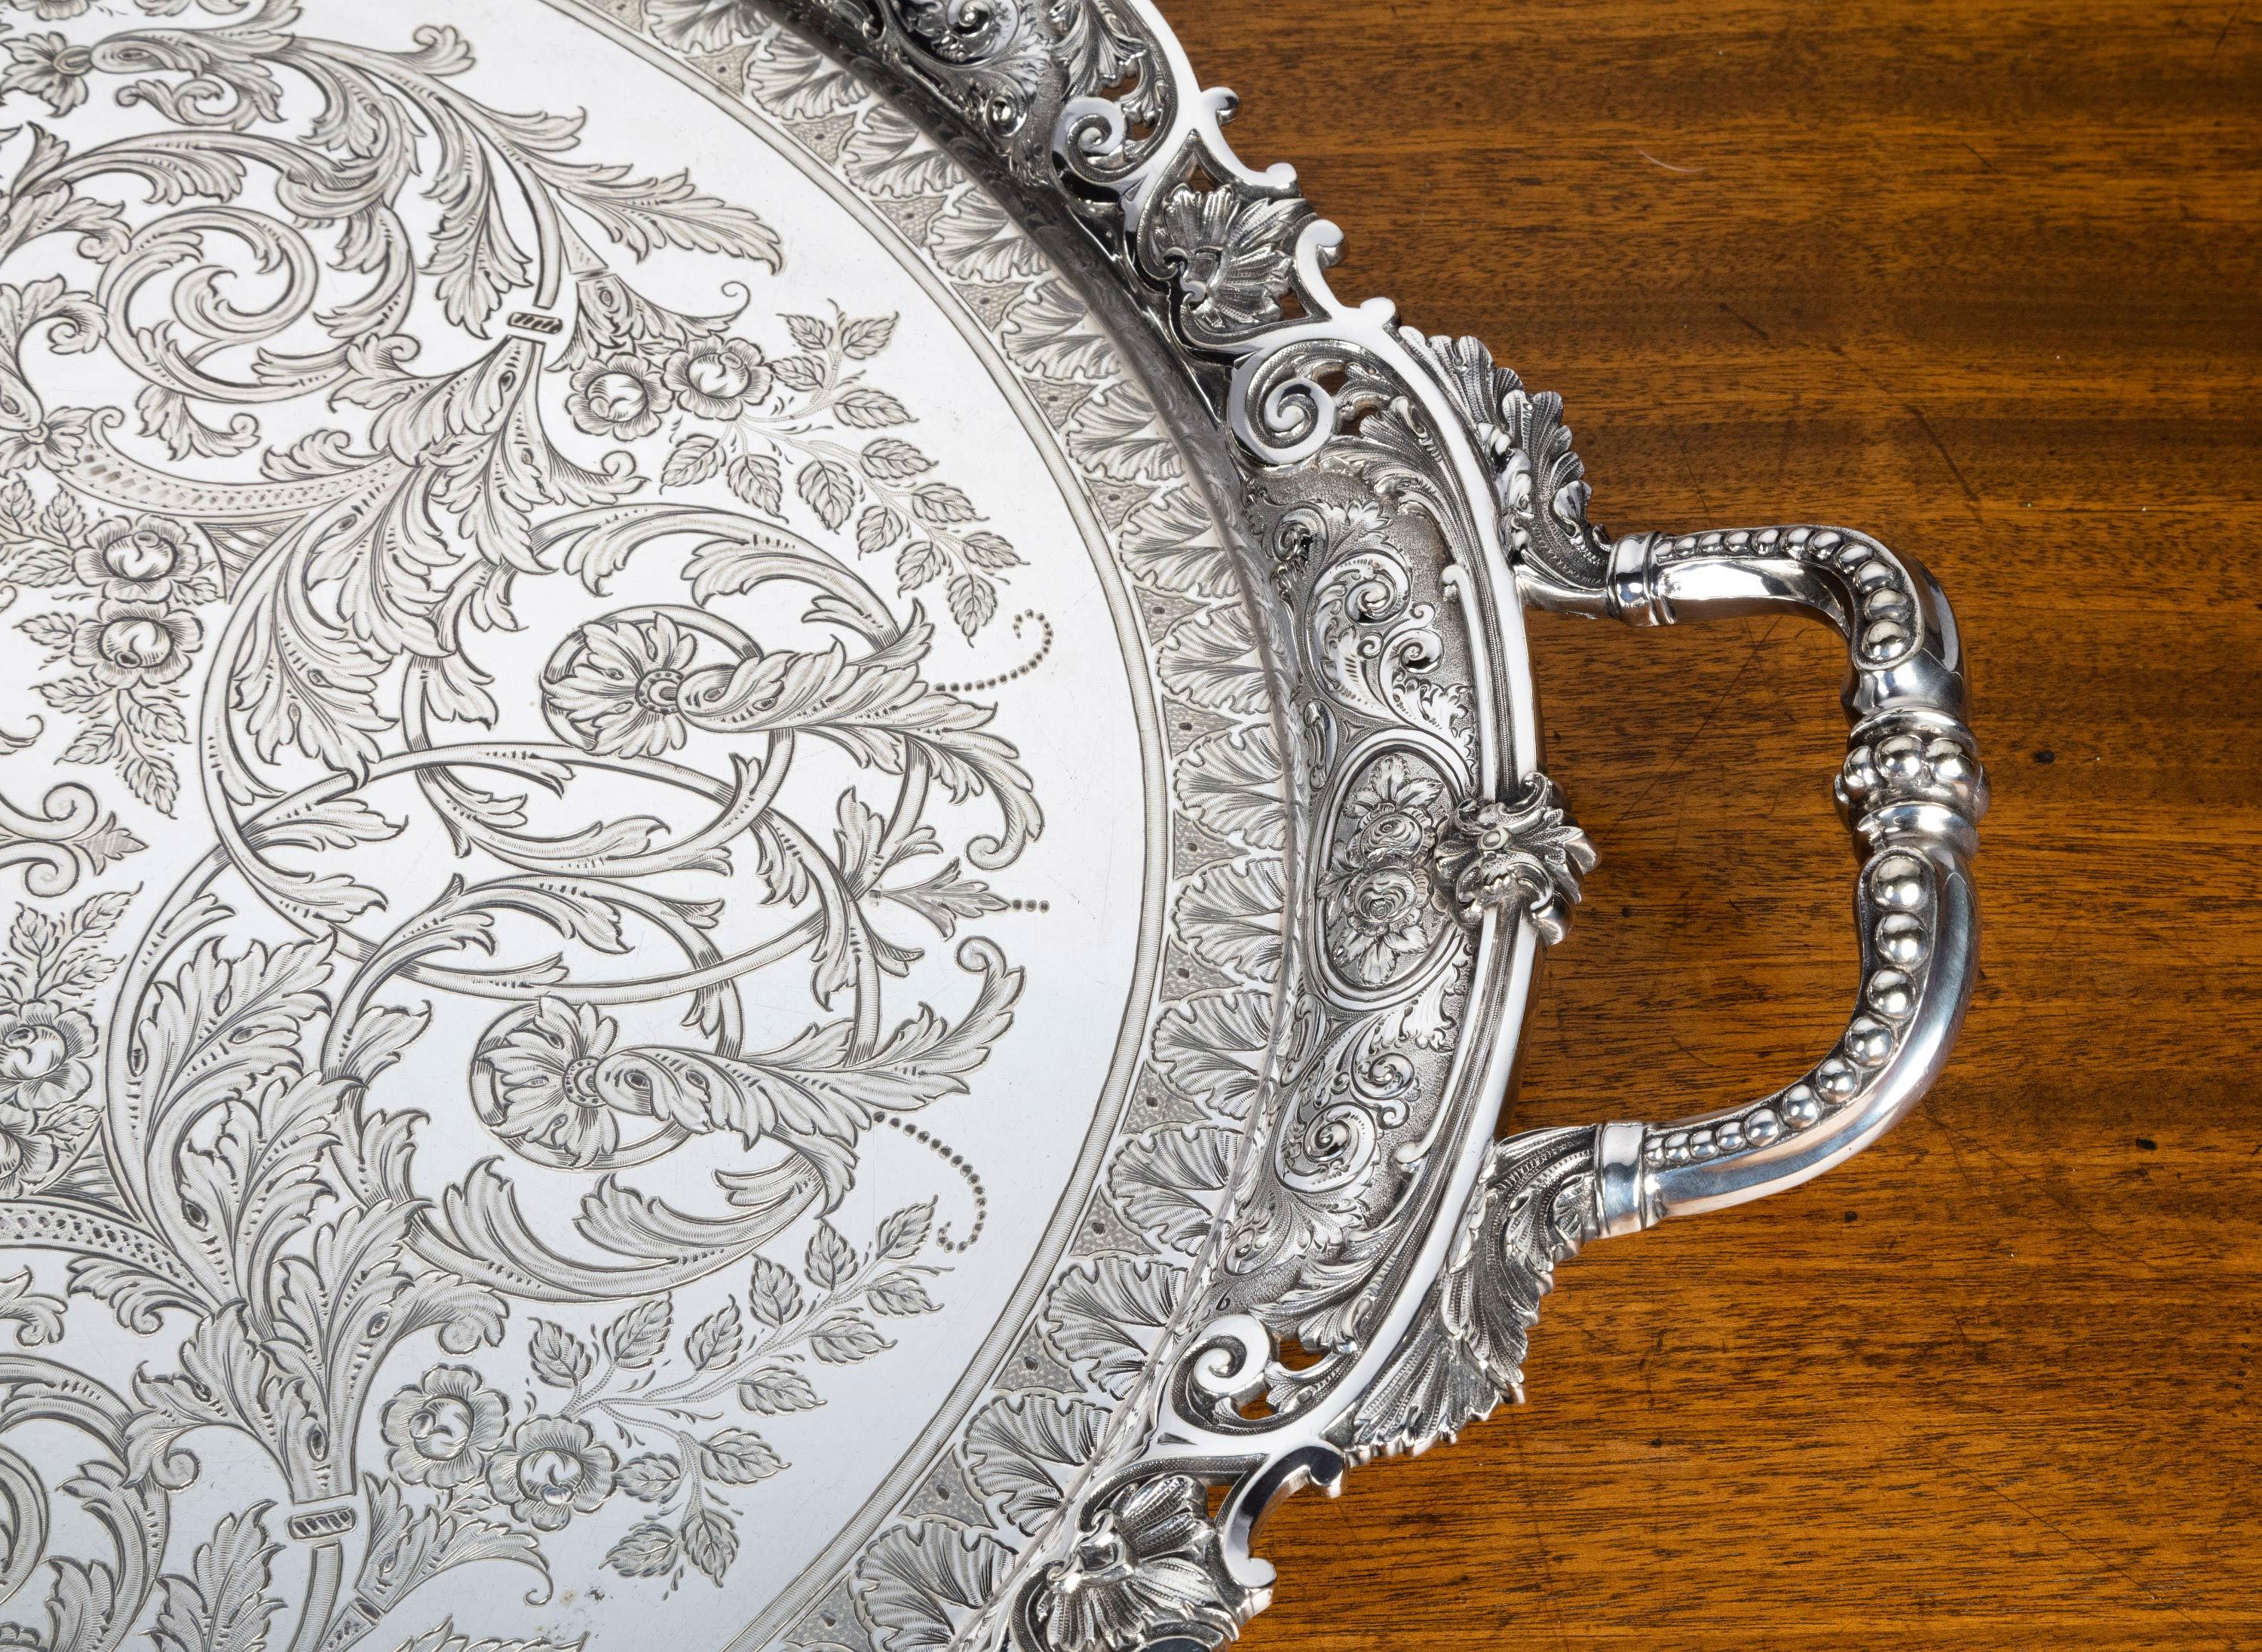 A particularly fine quality, large oval tray. With a very finely cast and chiselled outer border and deeply engraved to the centre sections.